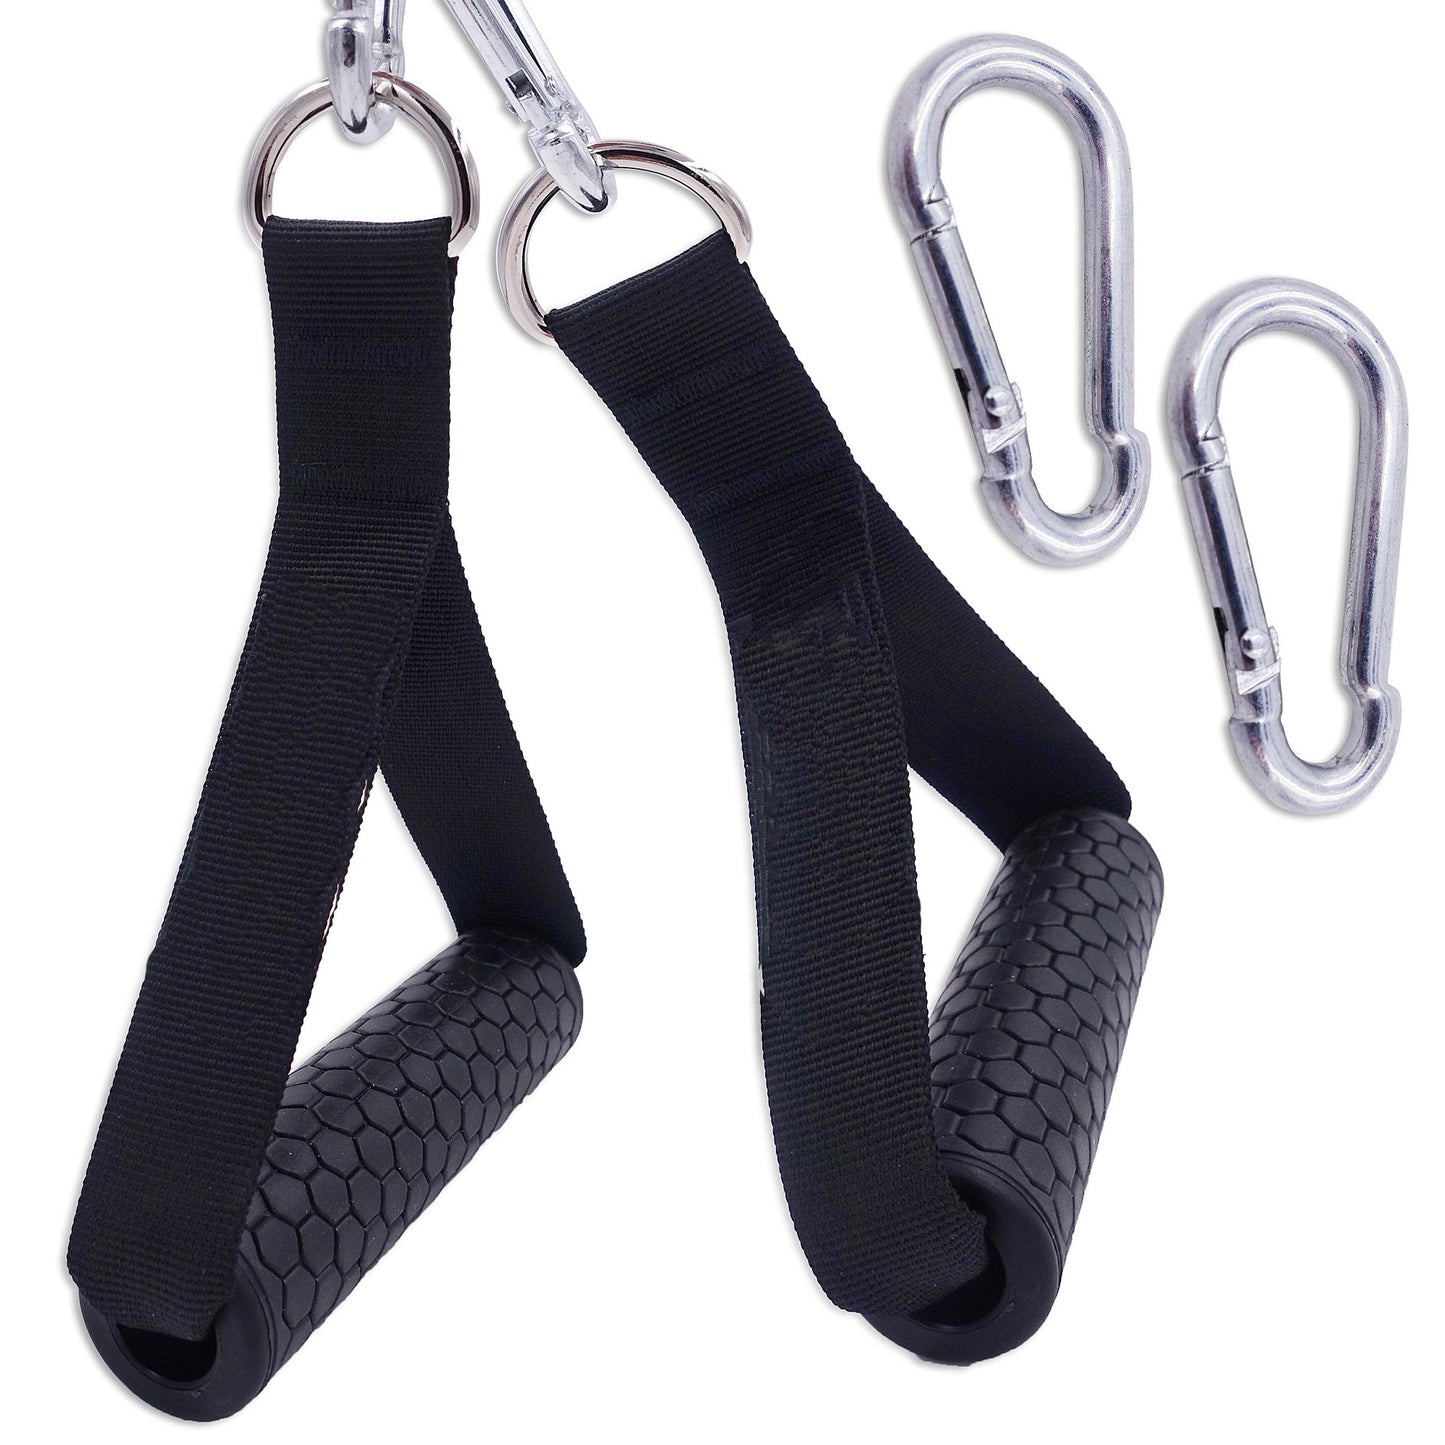 WILKYs0Gym Resistance Bands Handles Anti-slip Grip Strong
 Product information:


 Handle:TPE
 
 Tube length 13cm/5.1inch
 
 Tube diameter 3.5cm/1.38inch
 
 Webbing length 20cm/7.87inch
 
 Gourd hook length 7cm/2.75inch
 
